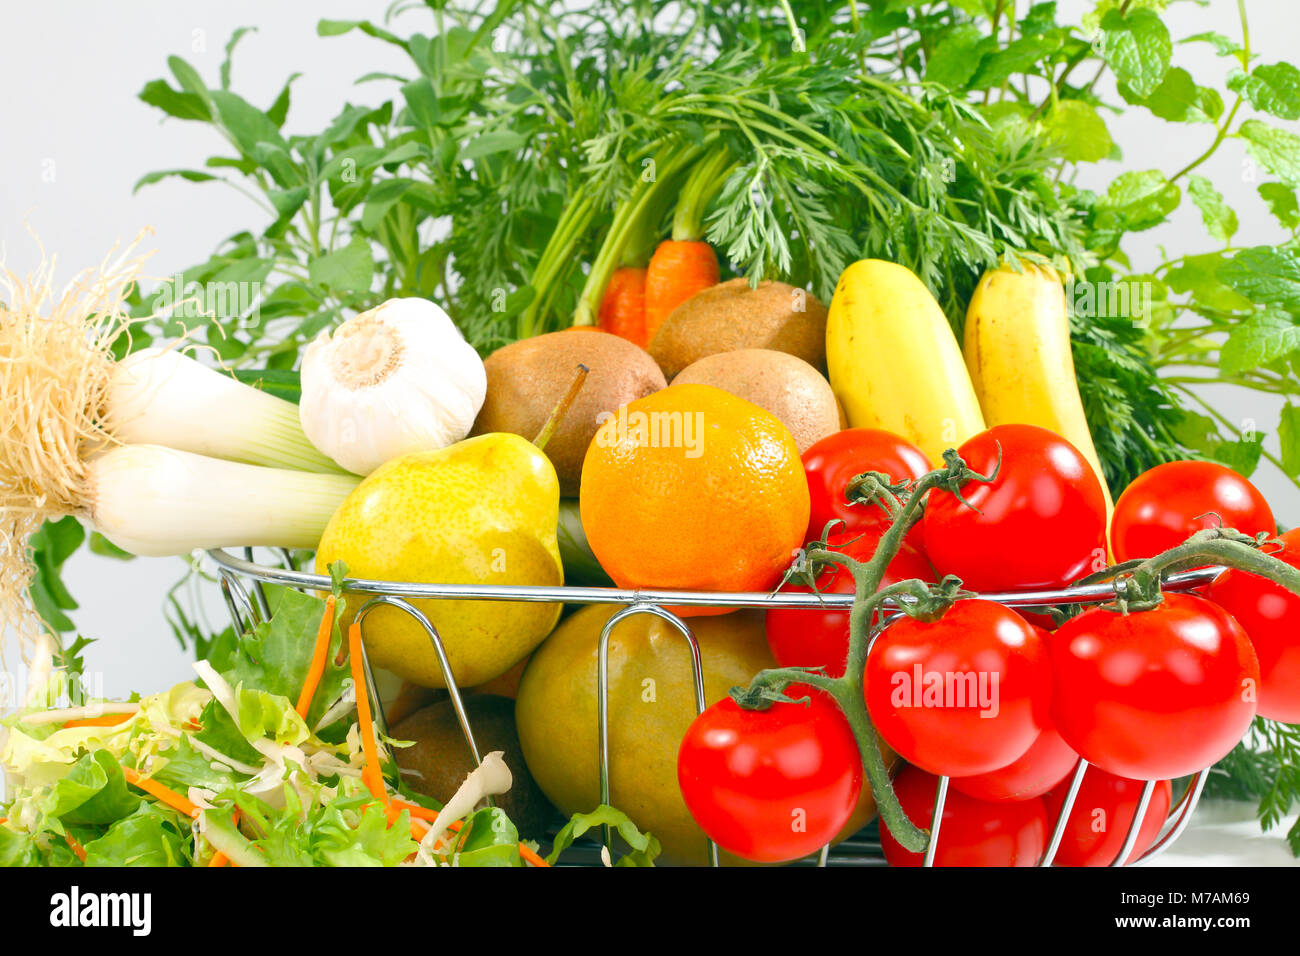 Fresh fruit and vegetables Stock Photo